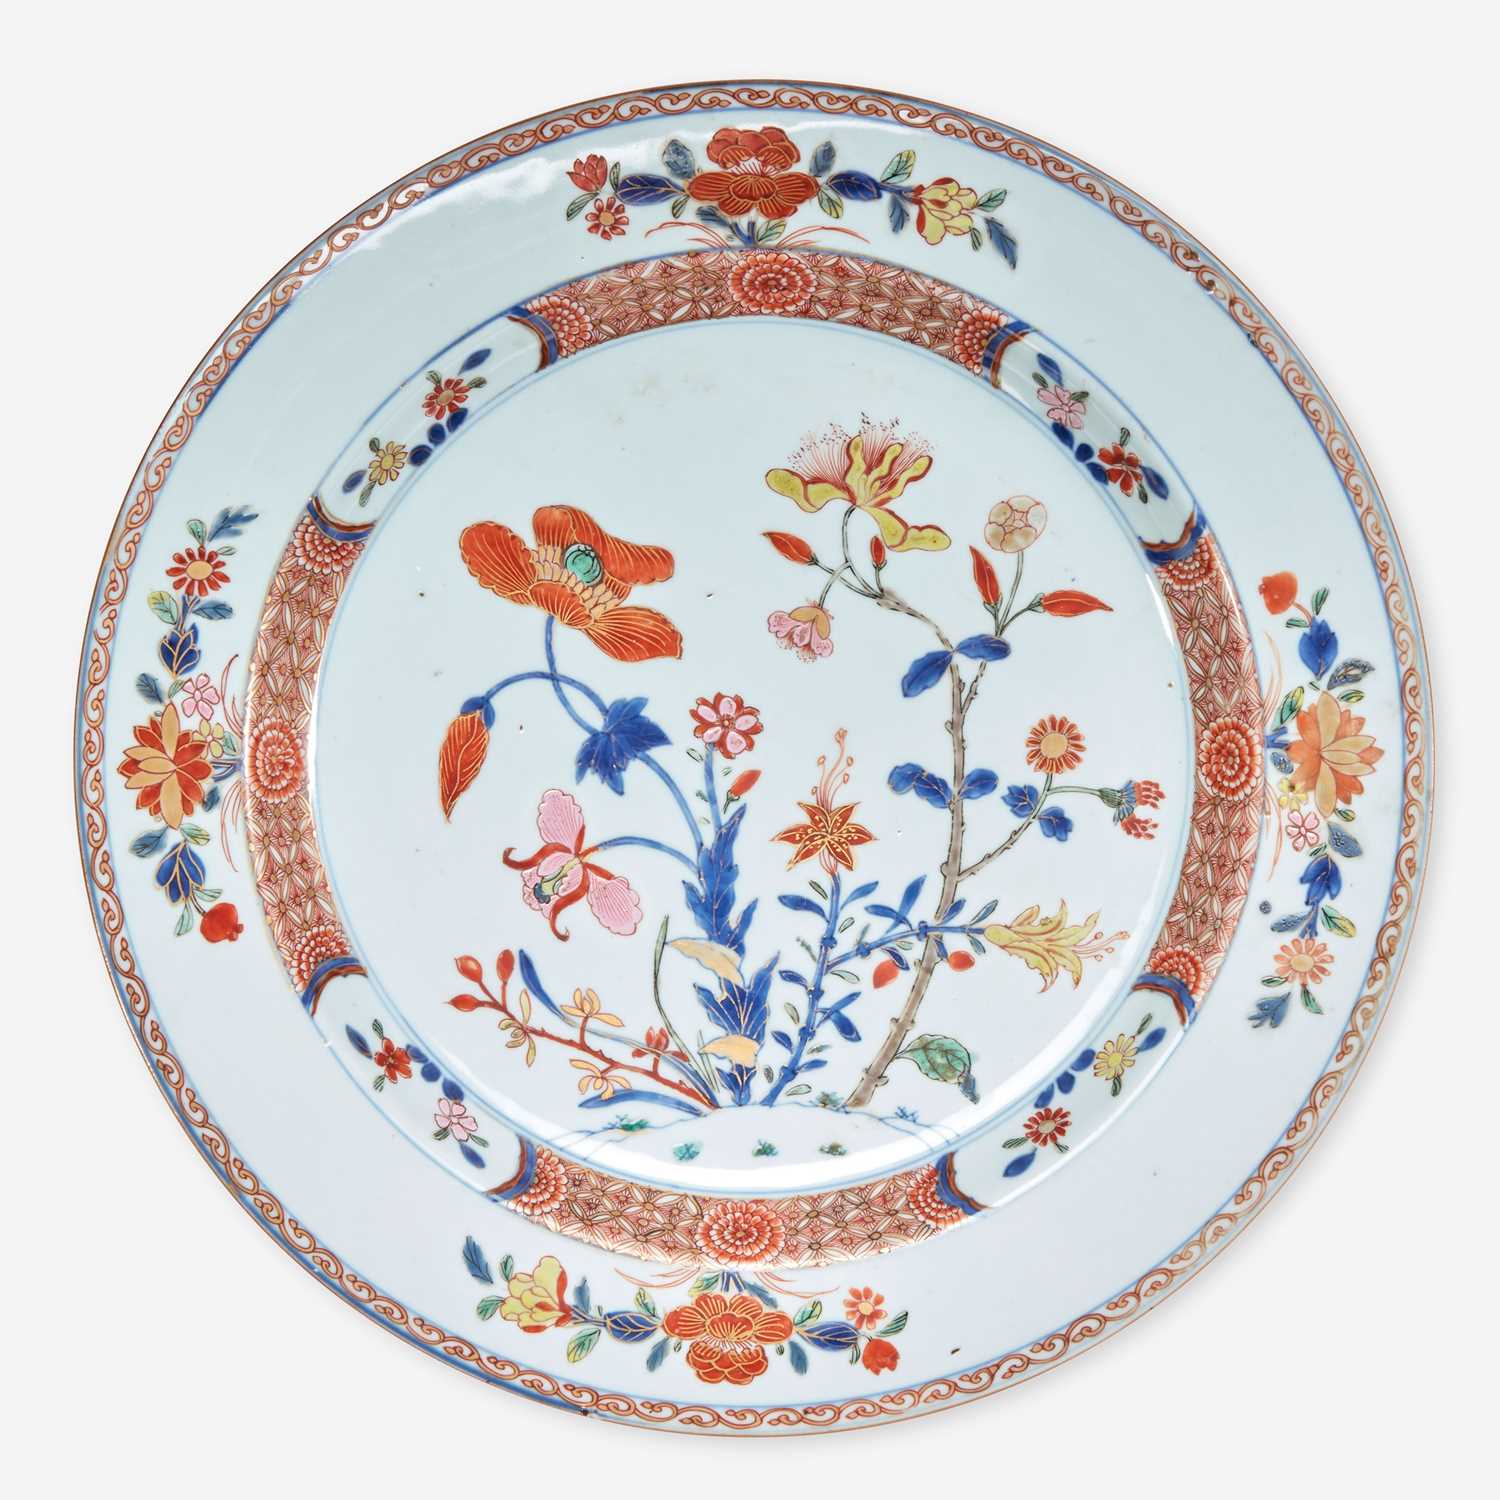 Lot 16 - An unusual Chinese export porcelain "rose-verte" floral-decorated charger 五彩出口瓷大盘